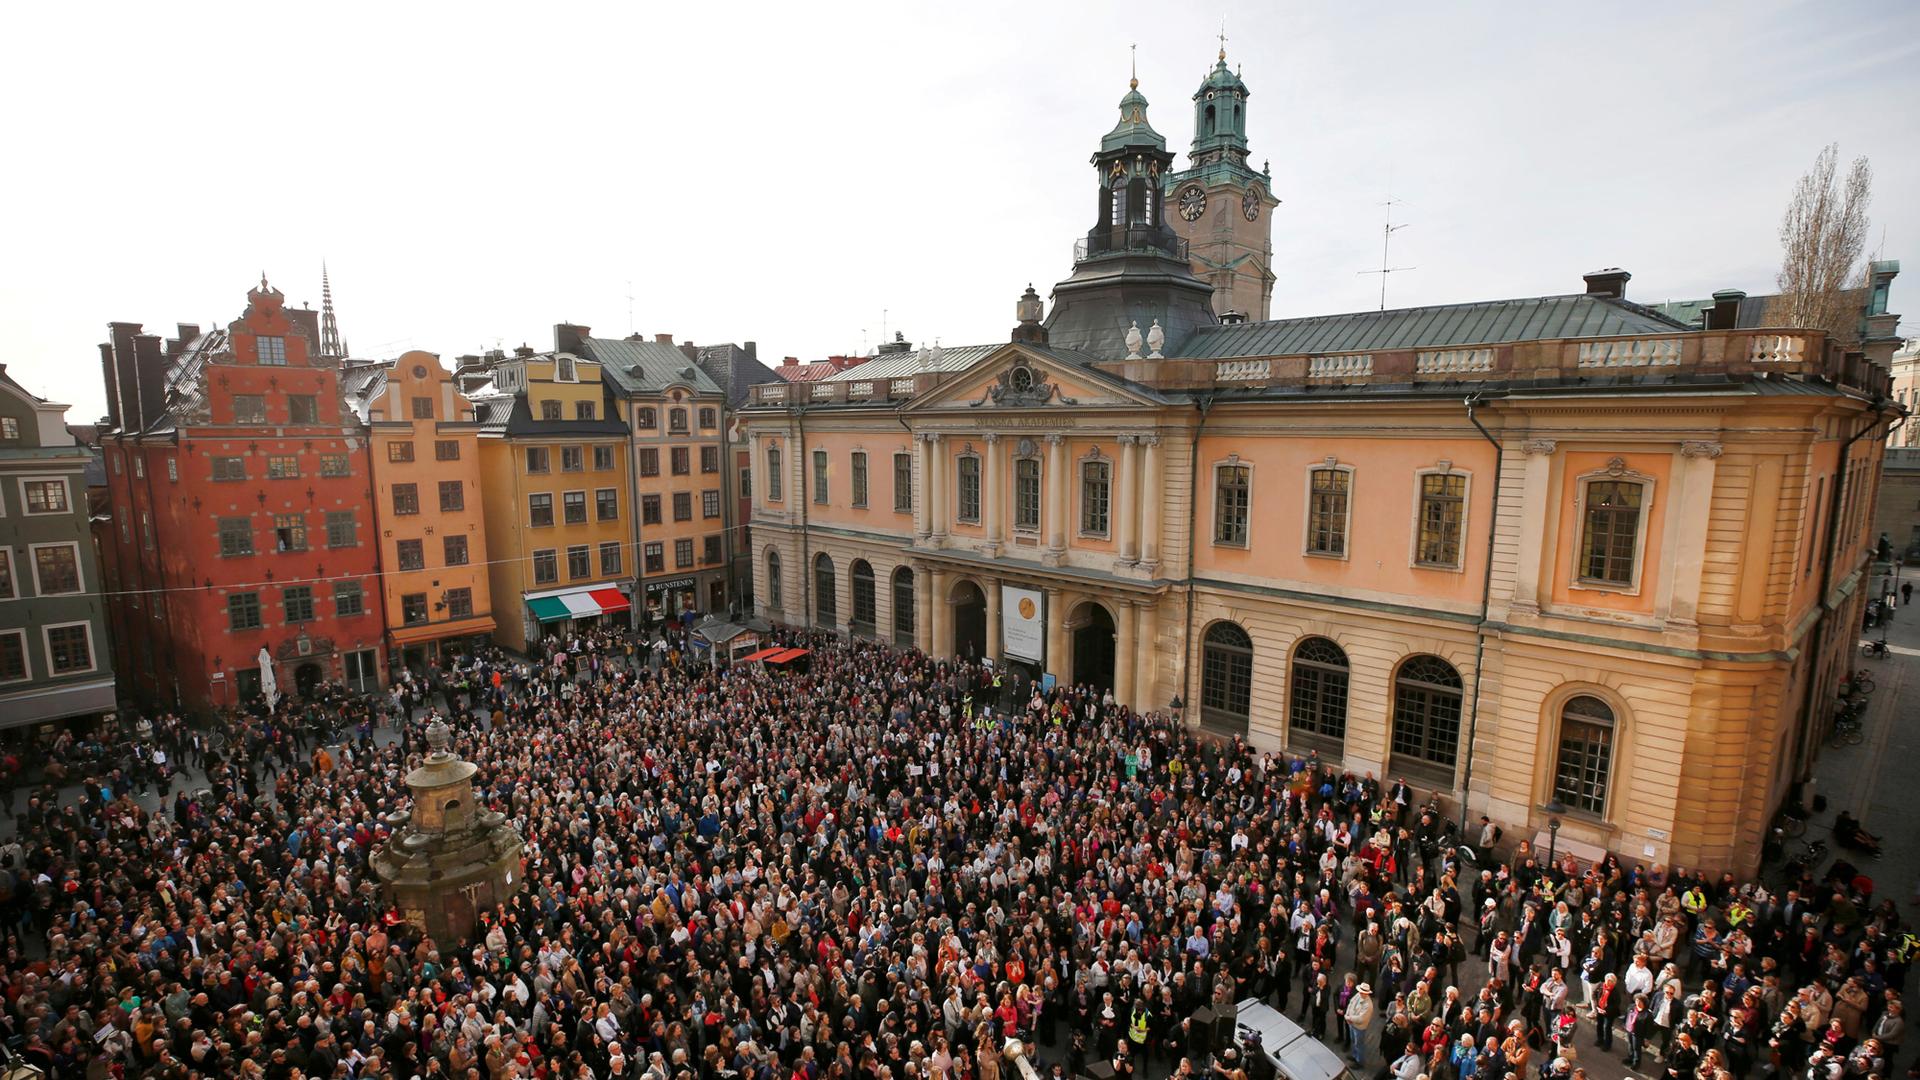 People gather in Stortorget square in Stockholm showing support for former Academy member and Permanent Secretary Sara Danius who stepped down last week.